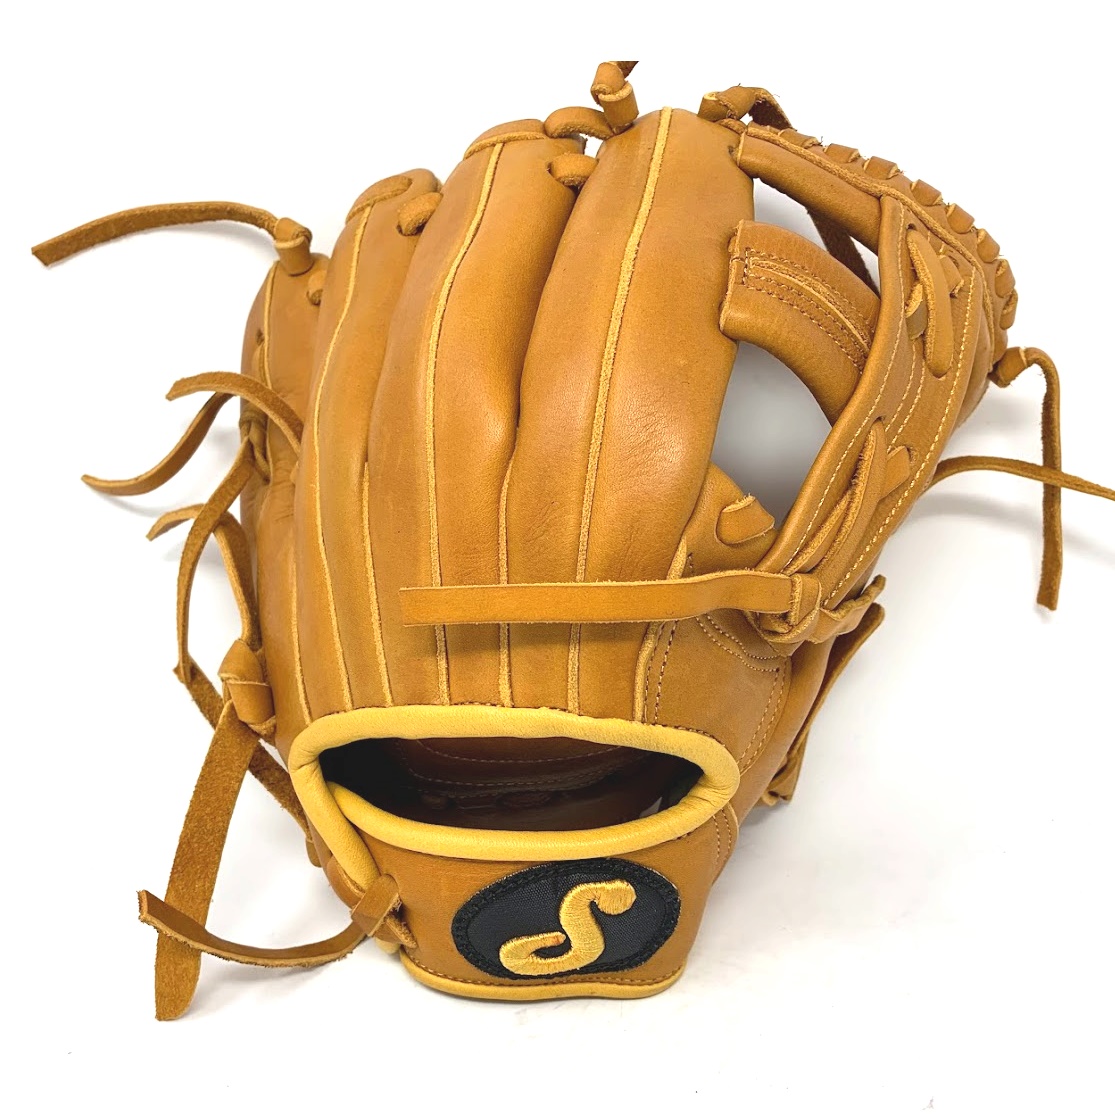 soto-honey-11-5-single-post-baseball-glove-right-hand-throw S20-115-HC-SP-RightHandThrow soto  <span><strong><span style=font-size medium;>Made in Mexico</span></strong>   <img class=__mce_add_custom__ title=mexico-flag-50.jpg src=  